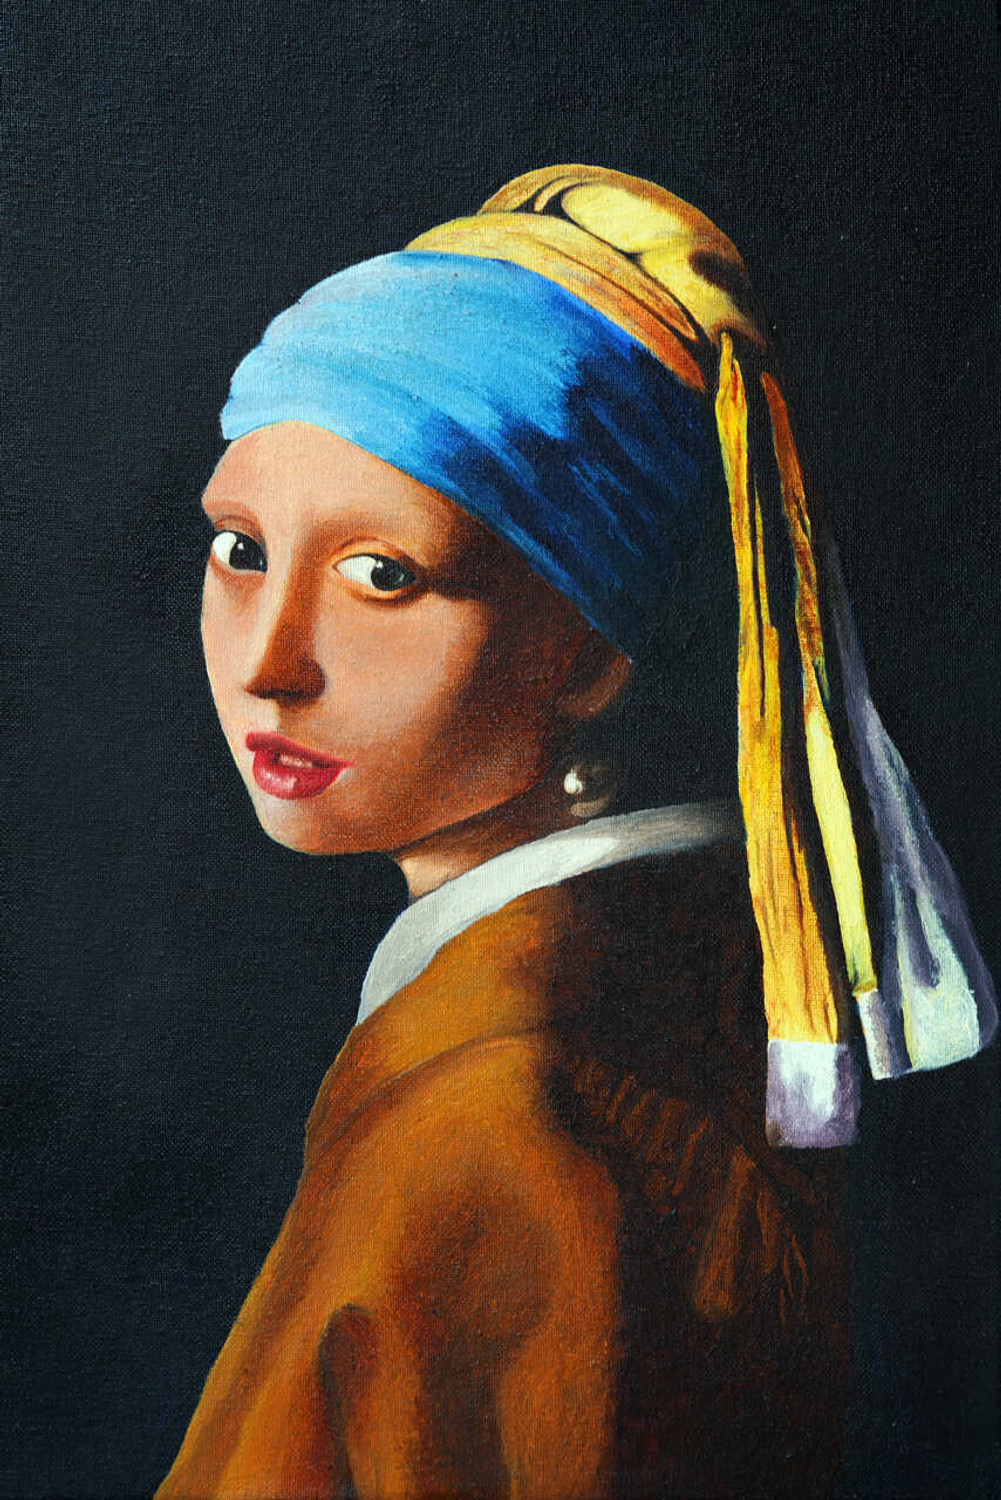 What feelings does the painting “Girl with a Pearl Earring” cause you to  feel? - Quora